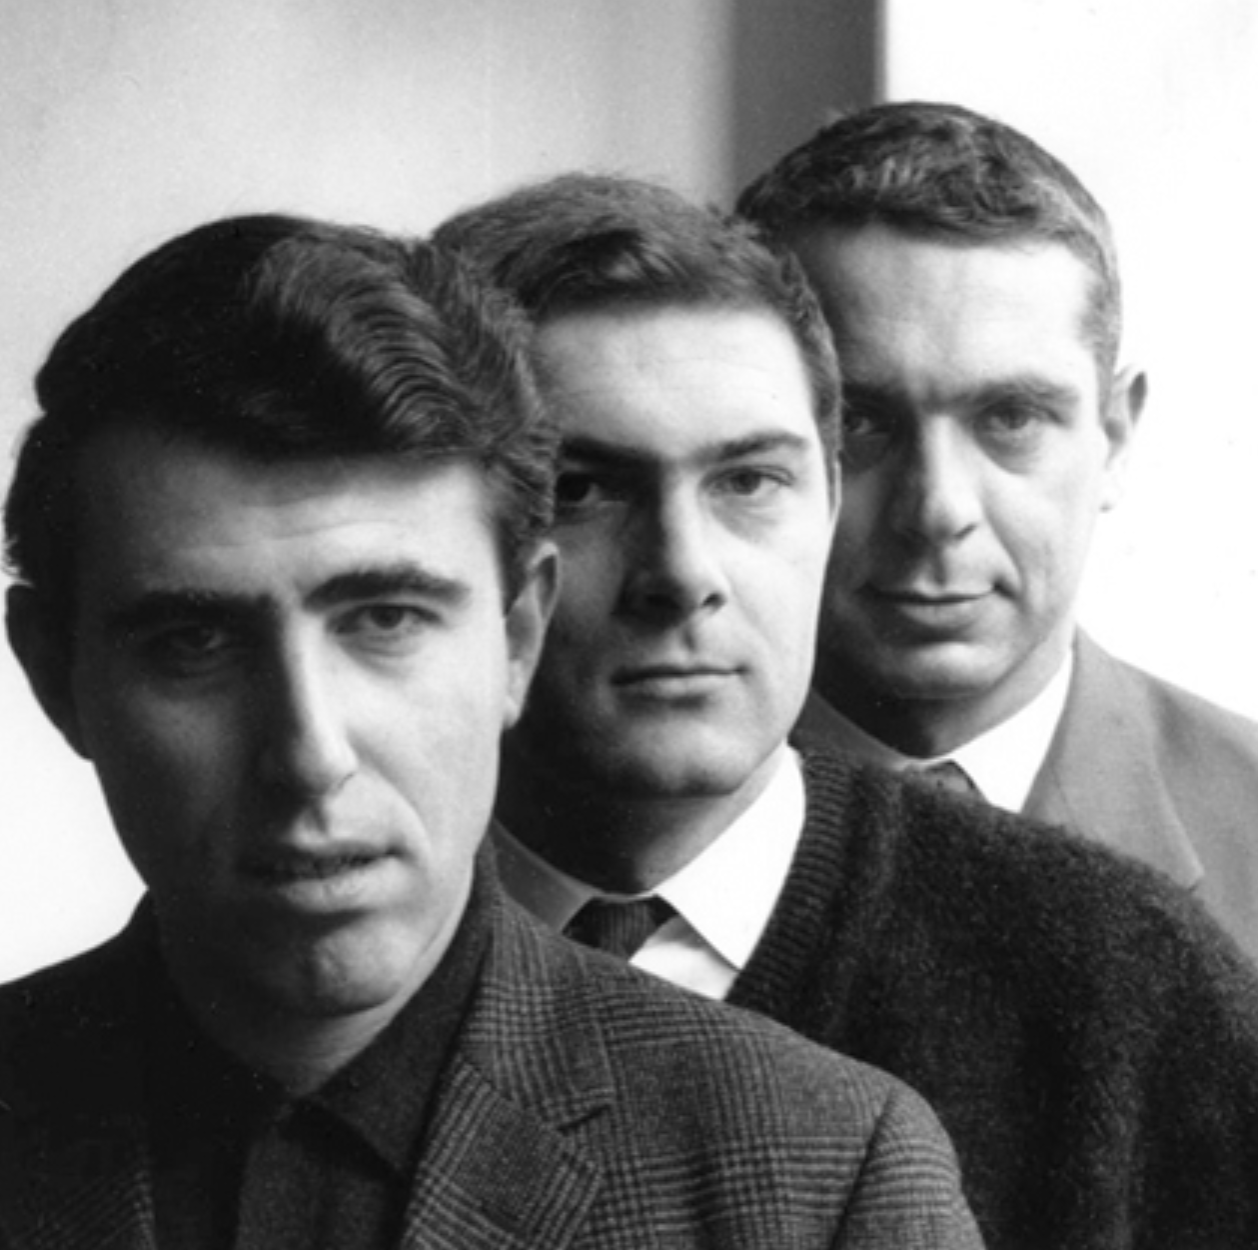 Fletcher, Forbes and Gill